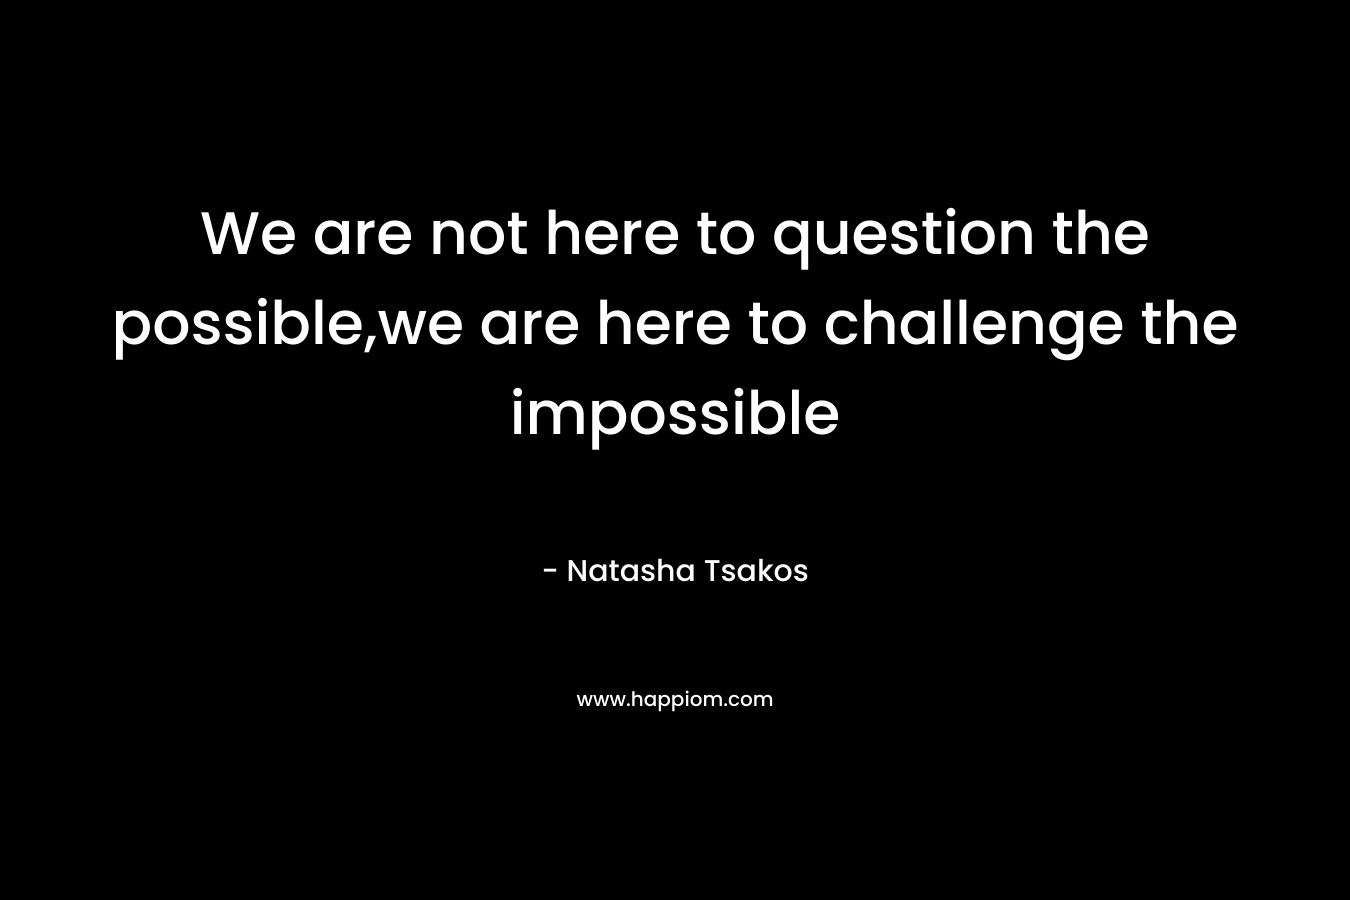 We are not here to question the possible,we are here to challenge the impossible